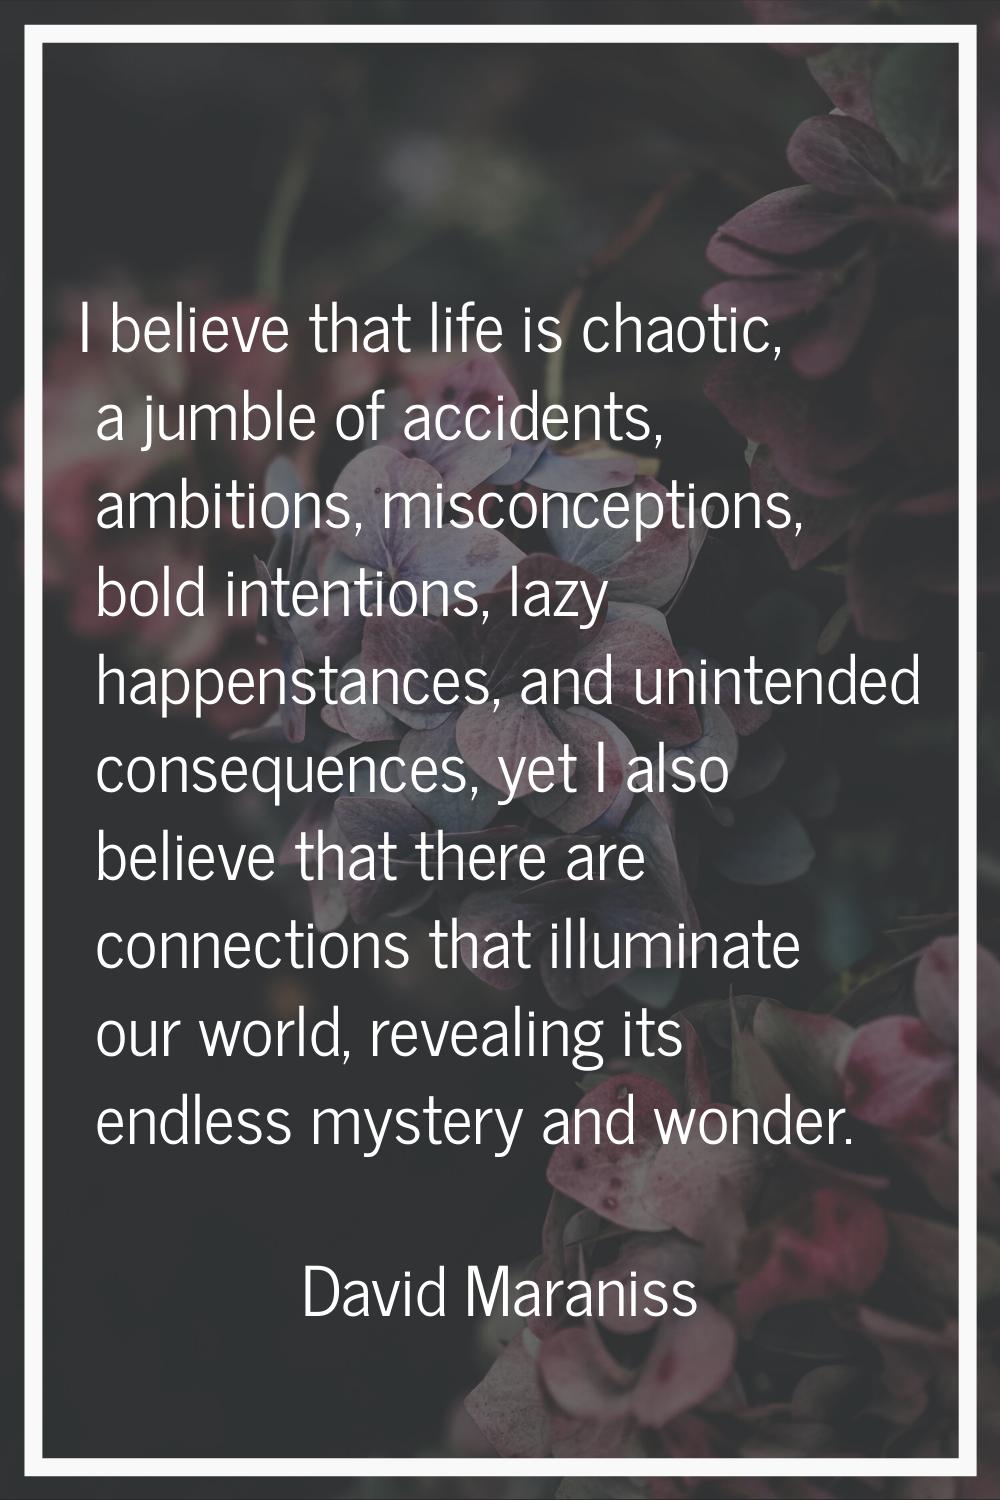 I believe that life is chaotic, a jumble of accidents, ambitions, misconceptions, bold intentions, 